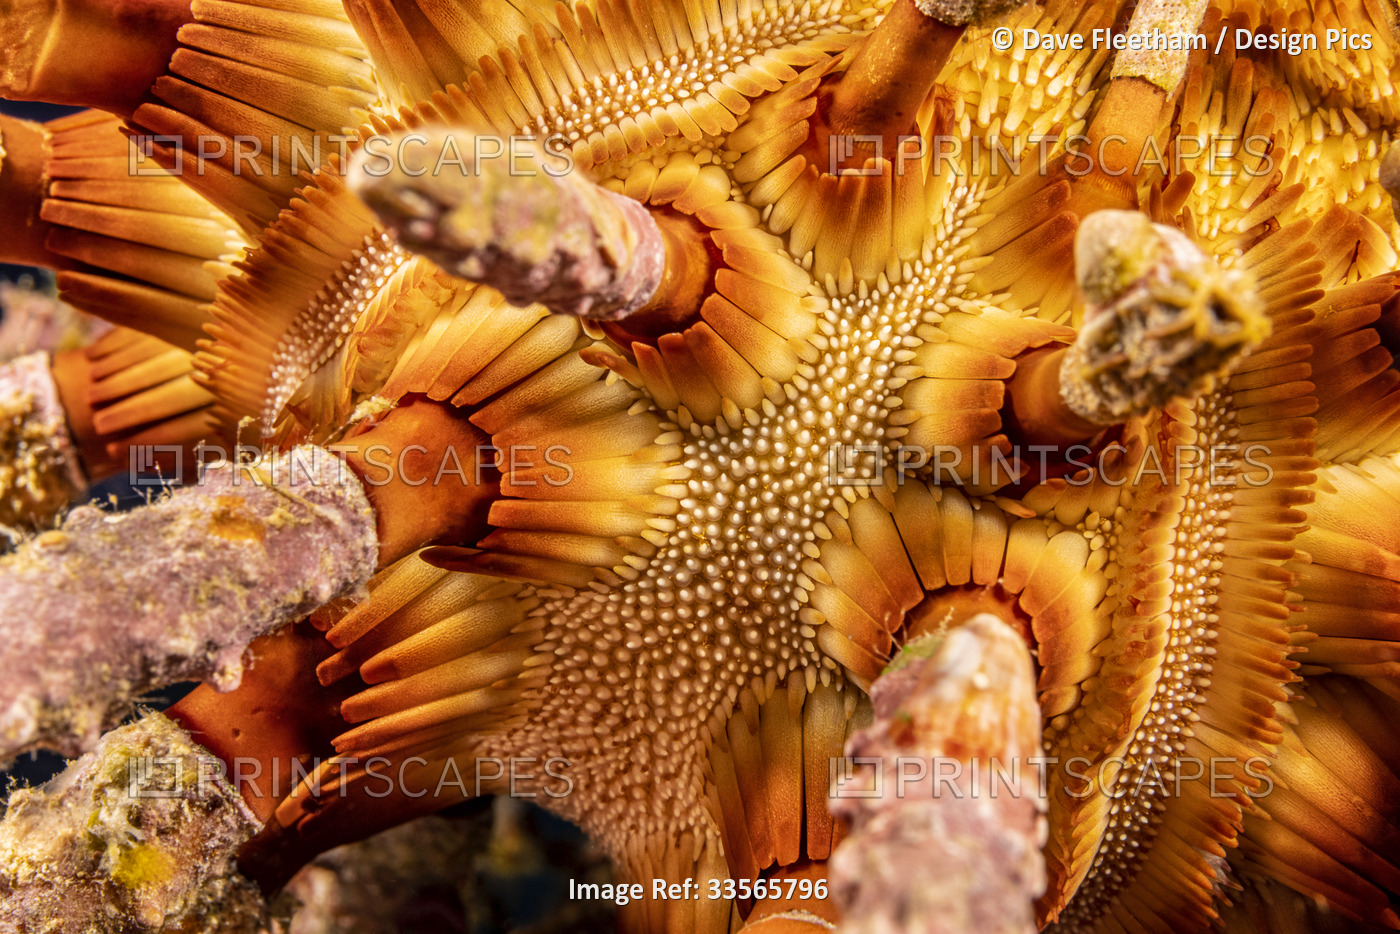 A close up look between the long thorny spines of the rough-spined urchin ...